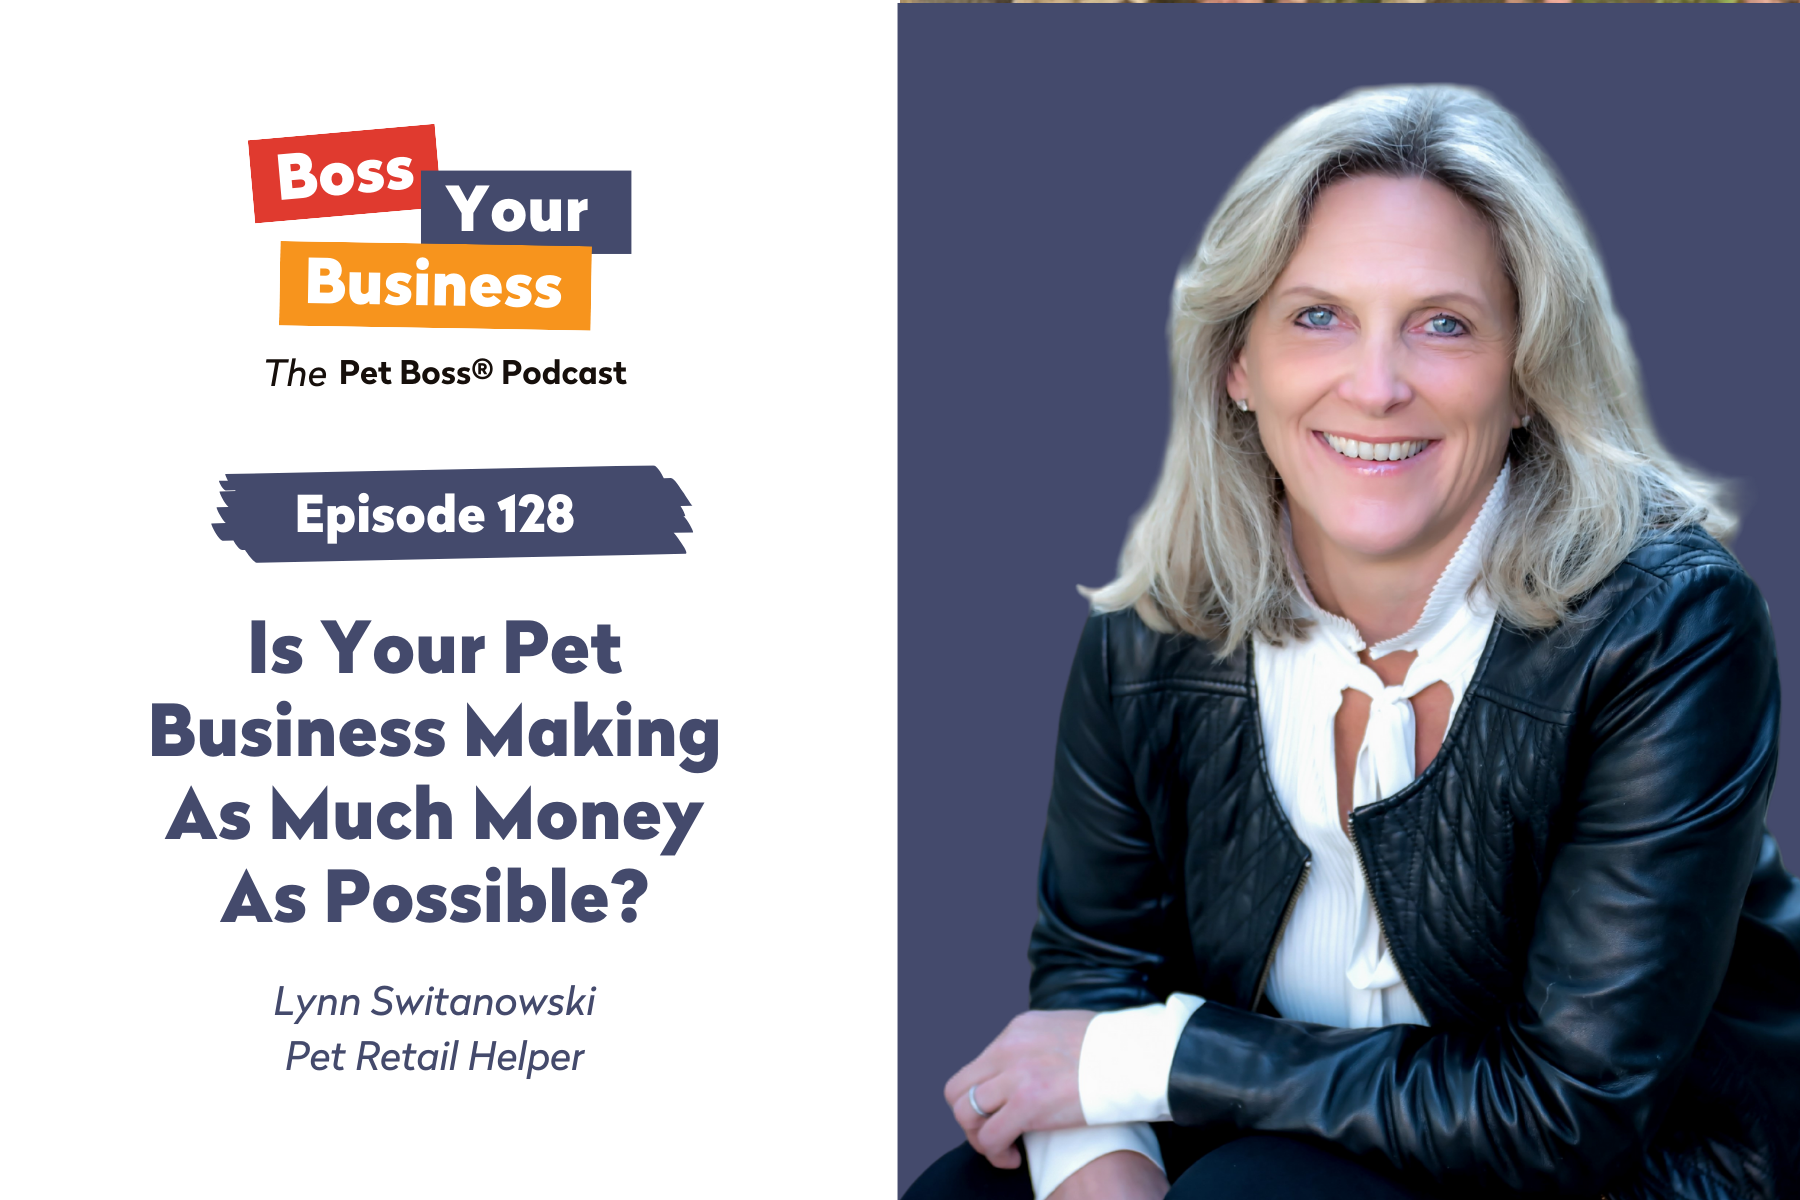 Boss Your Business Pet Boss Podcast Is Your Pet Business Making As Much Money As Possible Lynn Switanowski Pet Retail Helper